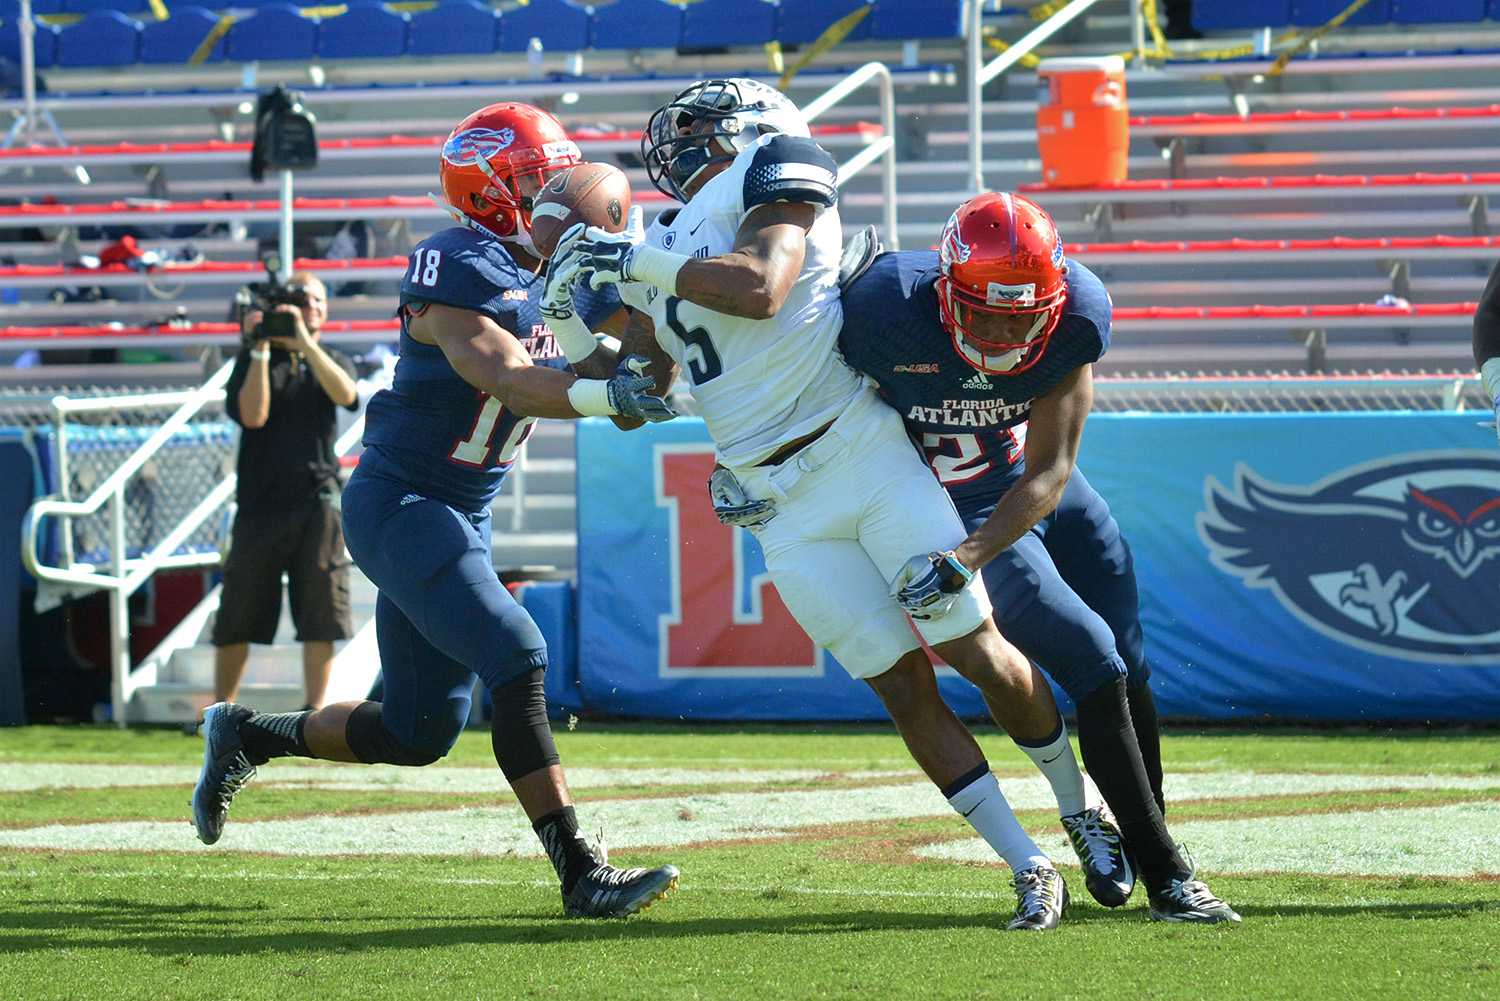 Owls senior cornerback D’Joun Smith hits Monarchs wide receiver Antonio Vaughan hard, forcing an incompletion in the second quarter during Saturday’s game. Smith tallied up 5 tackles and 2 break-ups during his final game at FAU.